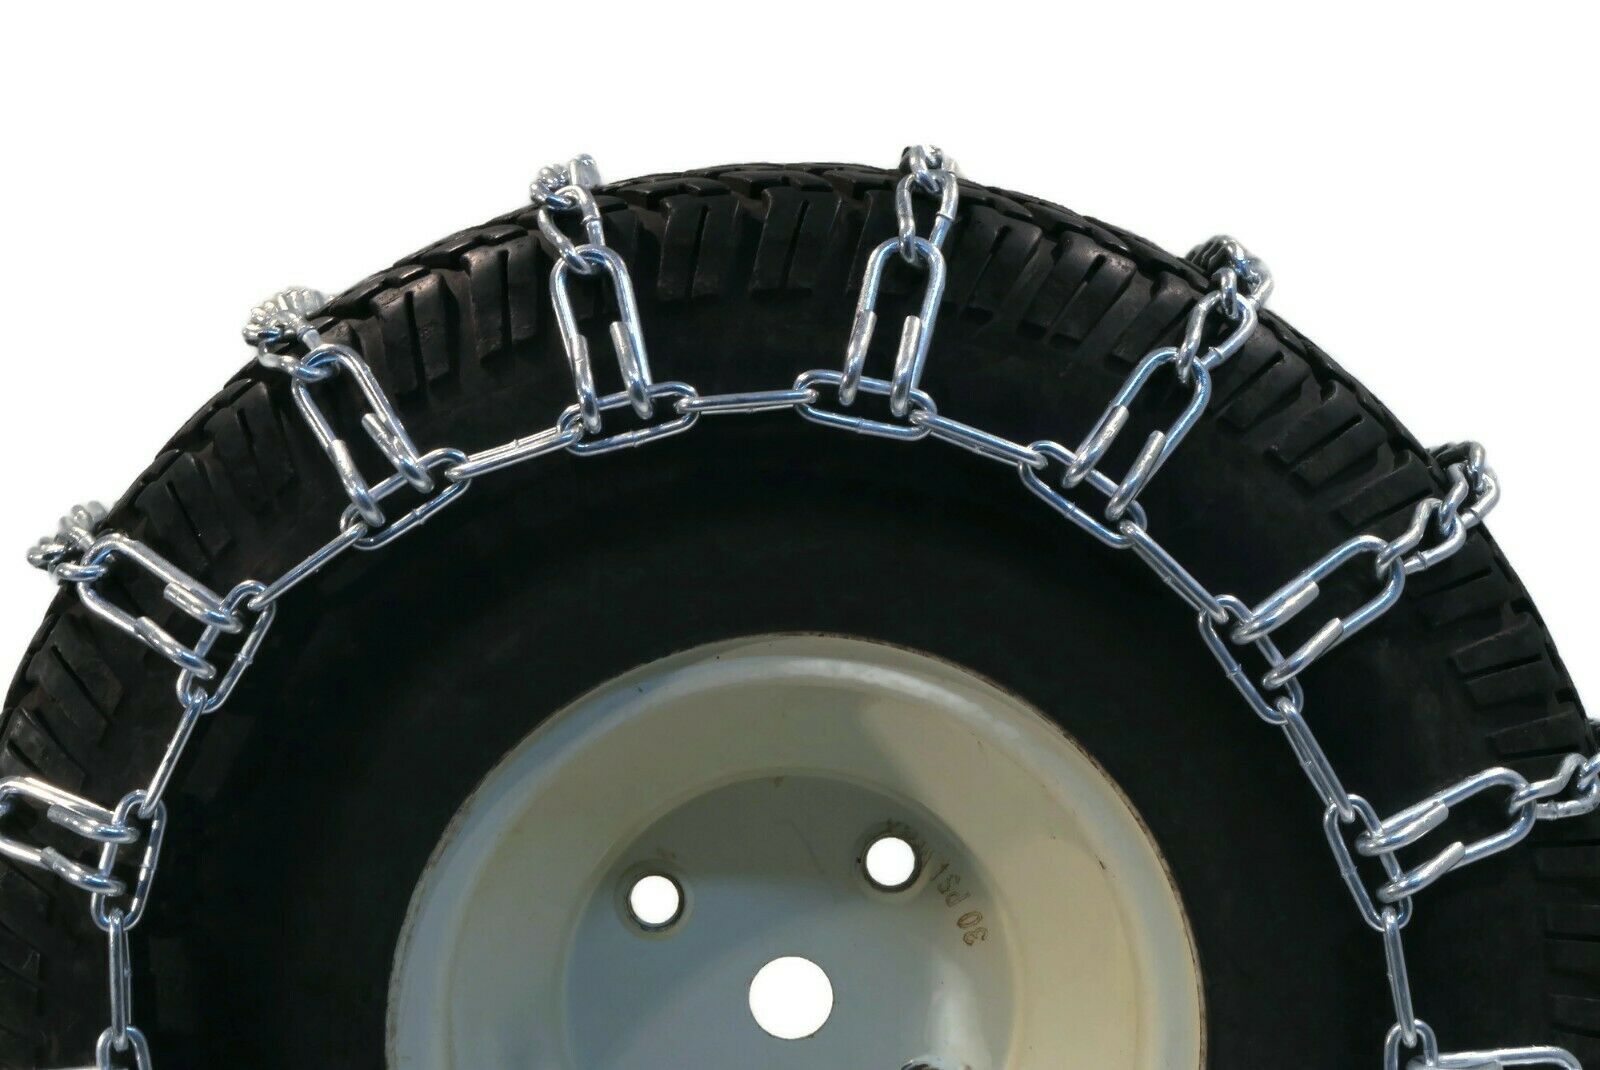 The ROP Shop | Pair 2 Link Tire Chains 16x6.50x8 For MTD / Cub Cadet Lawn Mower Tractor Rider - image 4 of 6